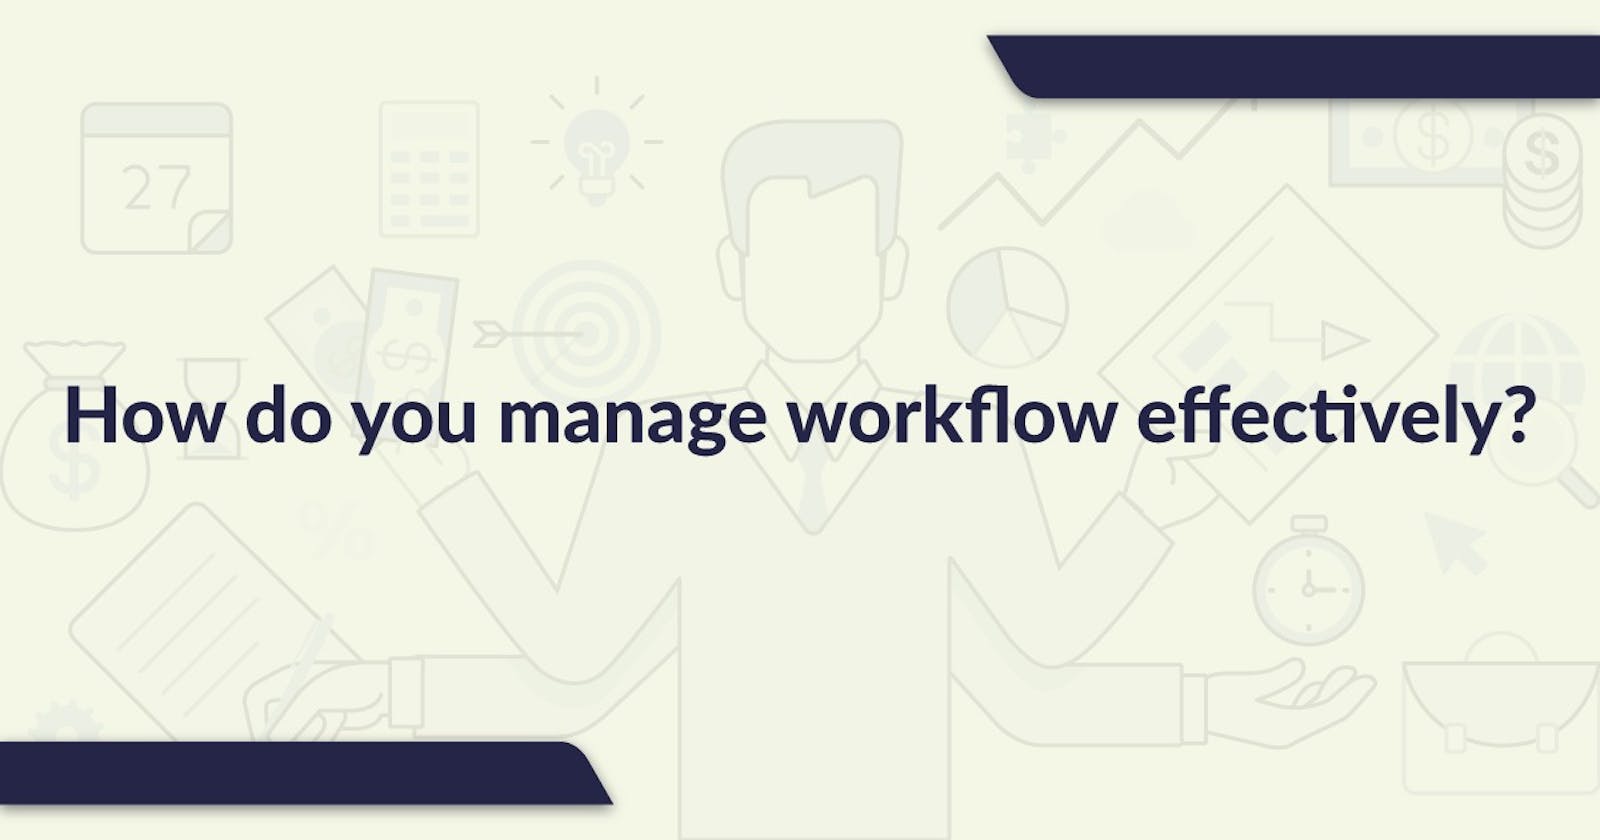 How do you manage workflow effectively